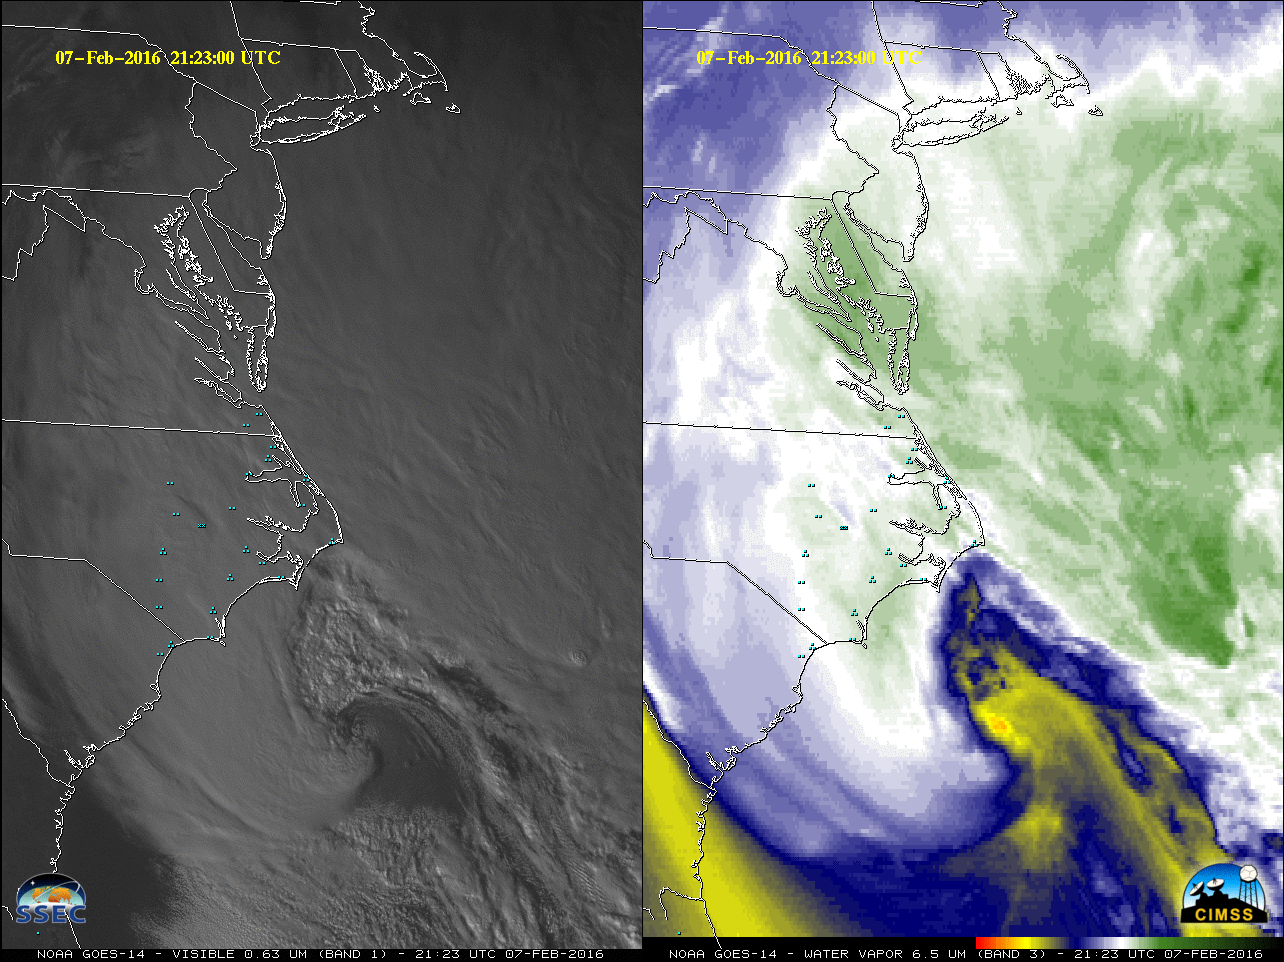 GOES-14 Visible (0.63 µm) and Water Vapor (6.5 µm) images, with surface weather symbols plotted [click to play animation]